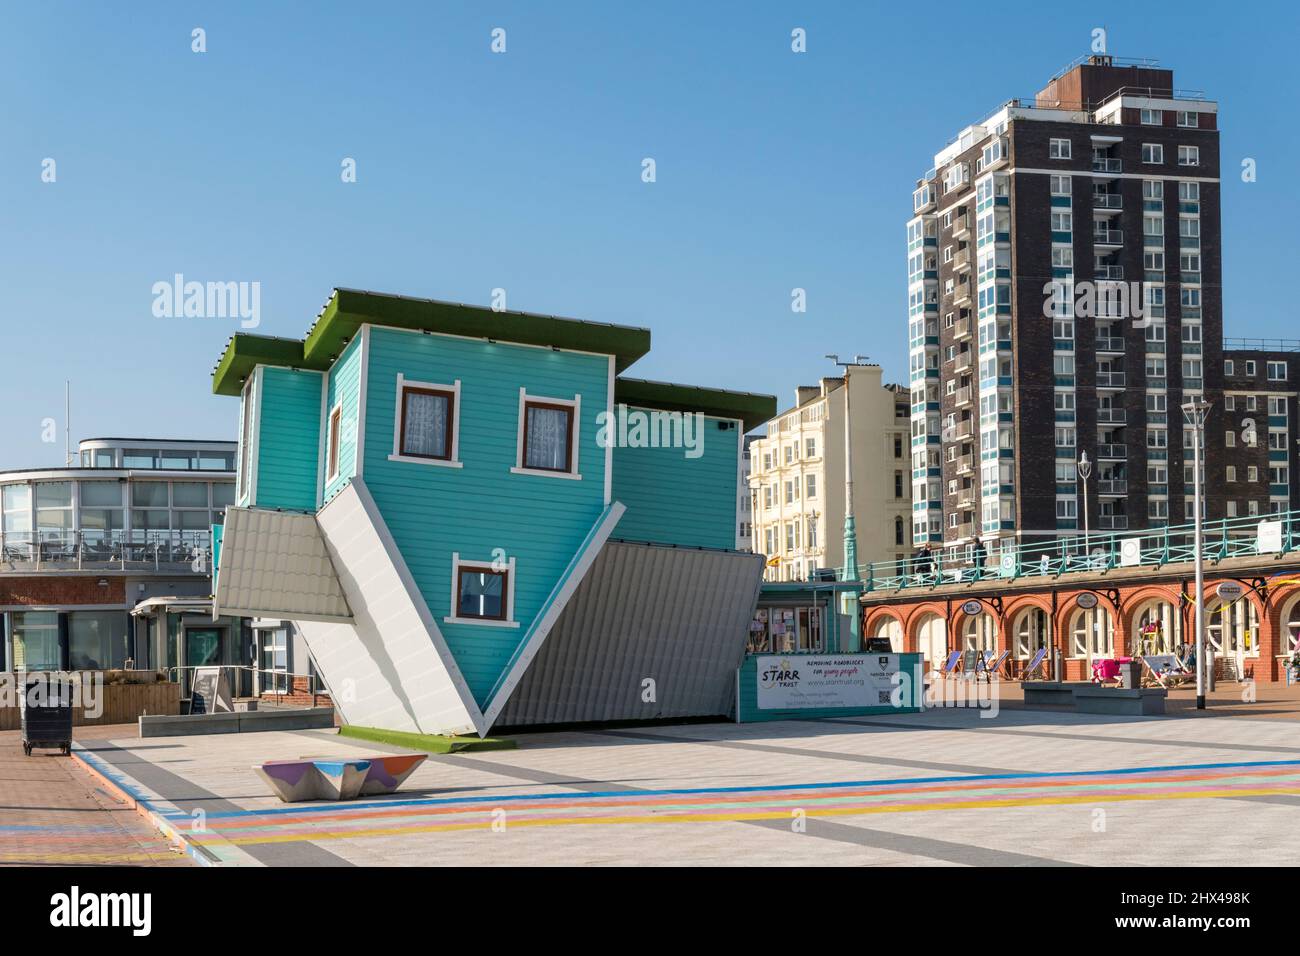 The Upside Down House in Brighton. Stock Photo